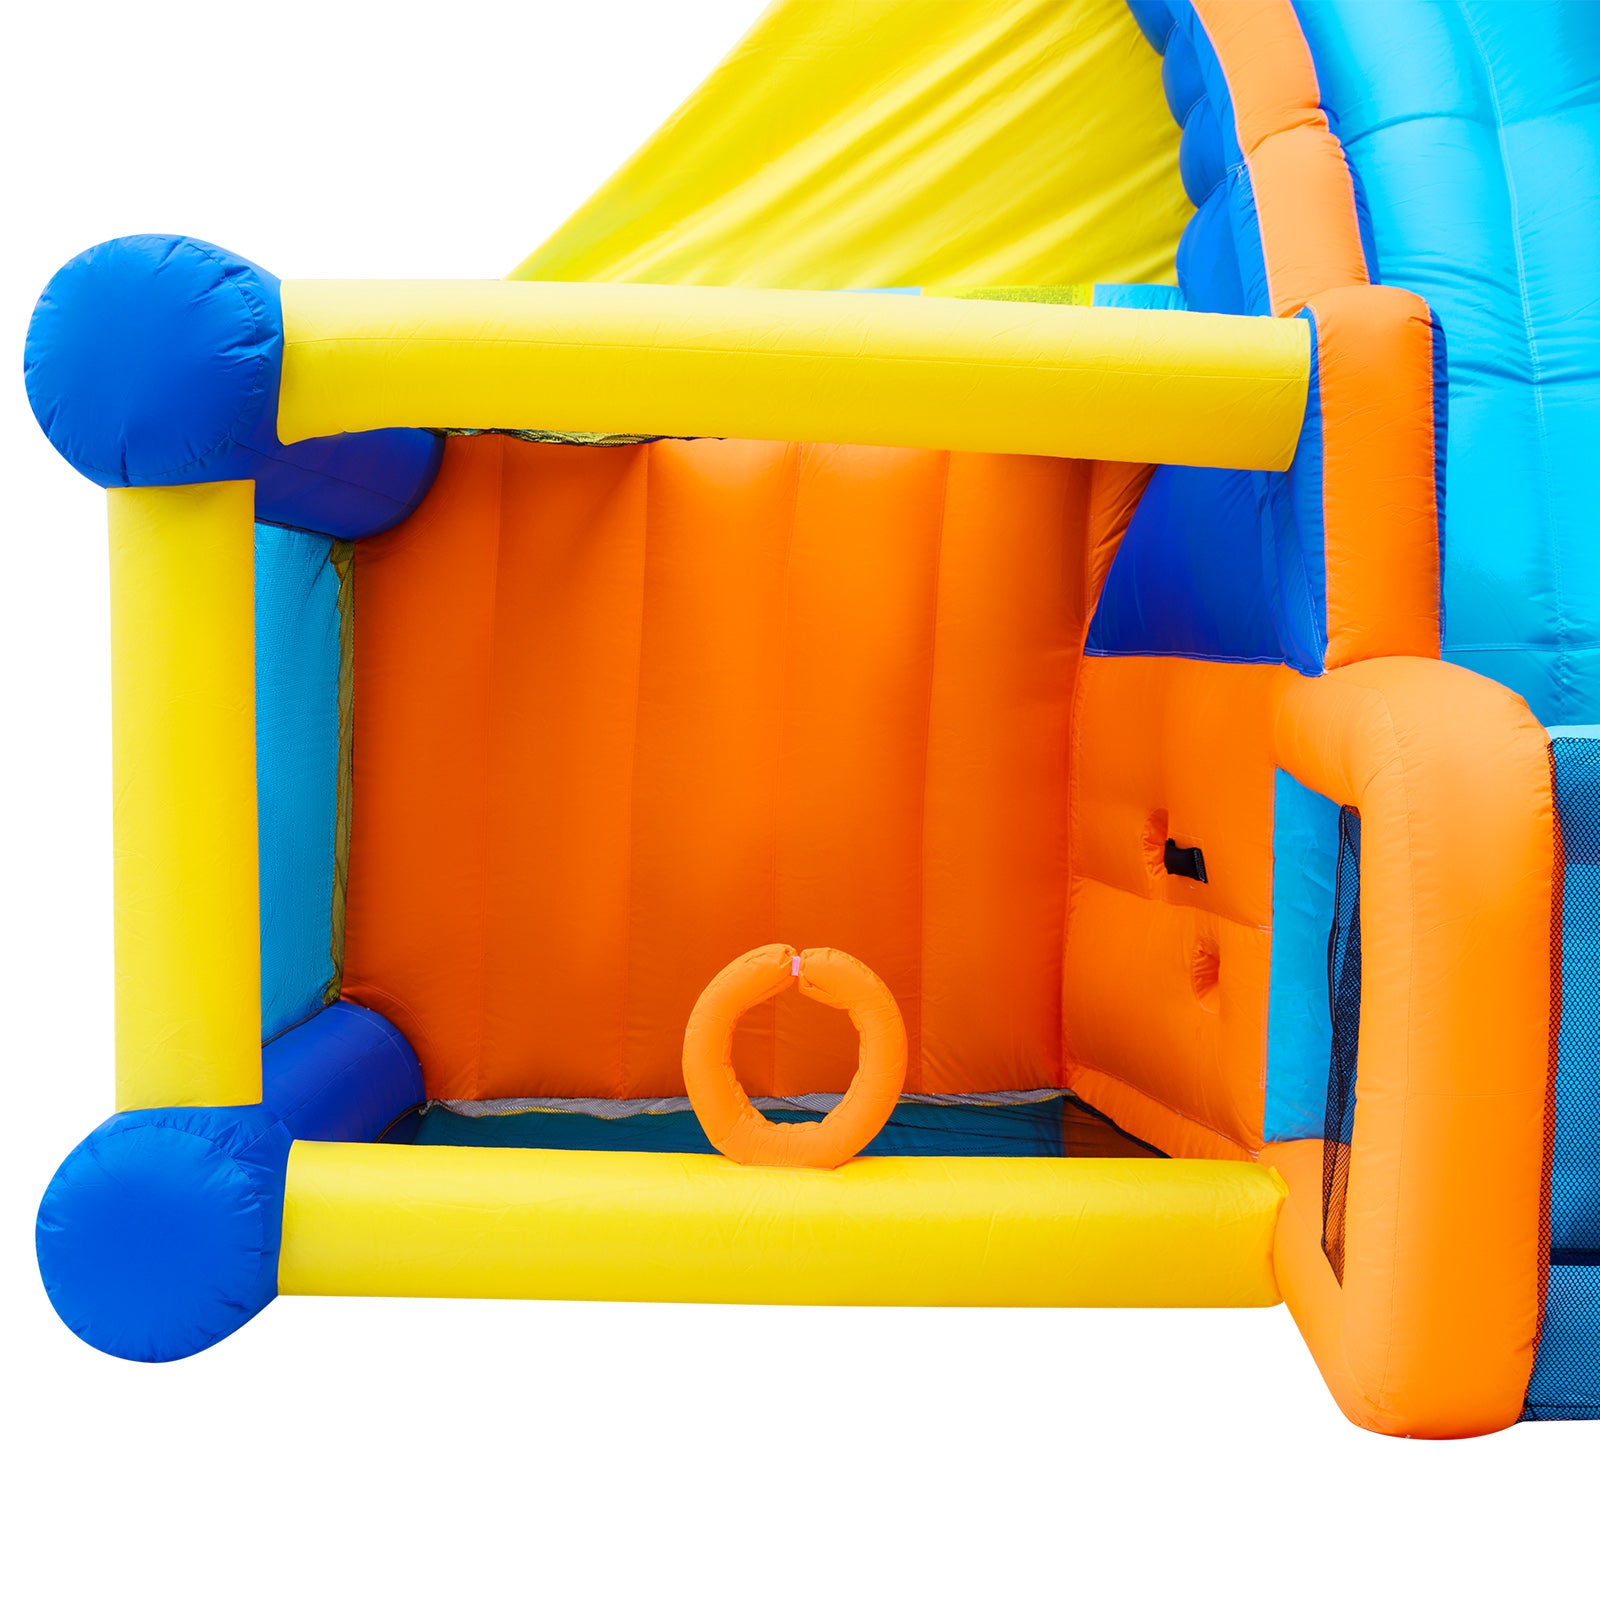 #1201 Inflatable Water Slide Bounce House,Giant Water Park, Double Slide Bouncer Castle w/Splash Pool, Jump Area, Climbing Wall, 550W Air Blower for Kids Backyard Indoor Outdoor Use,Free Water Gun